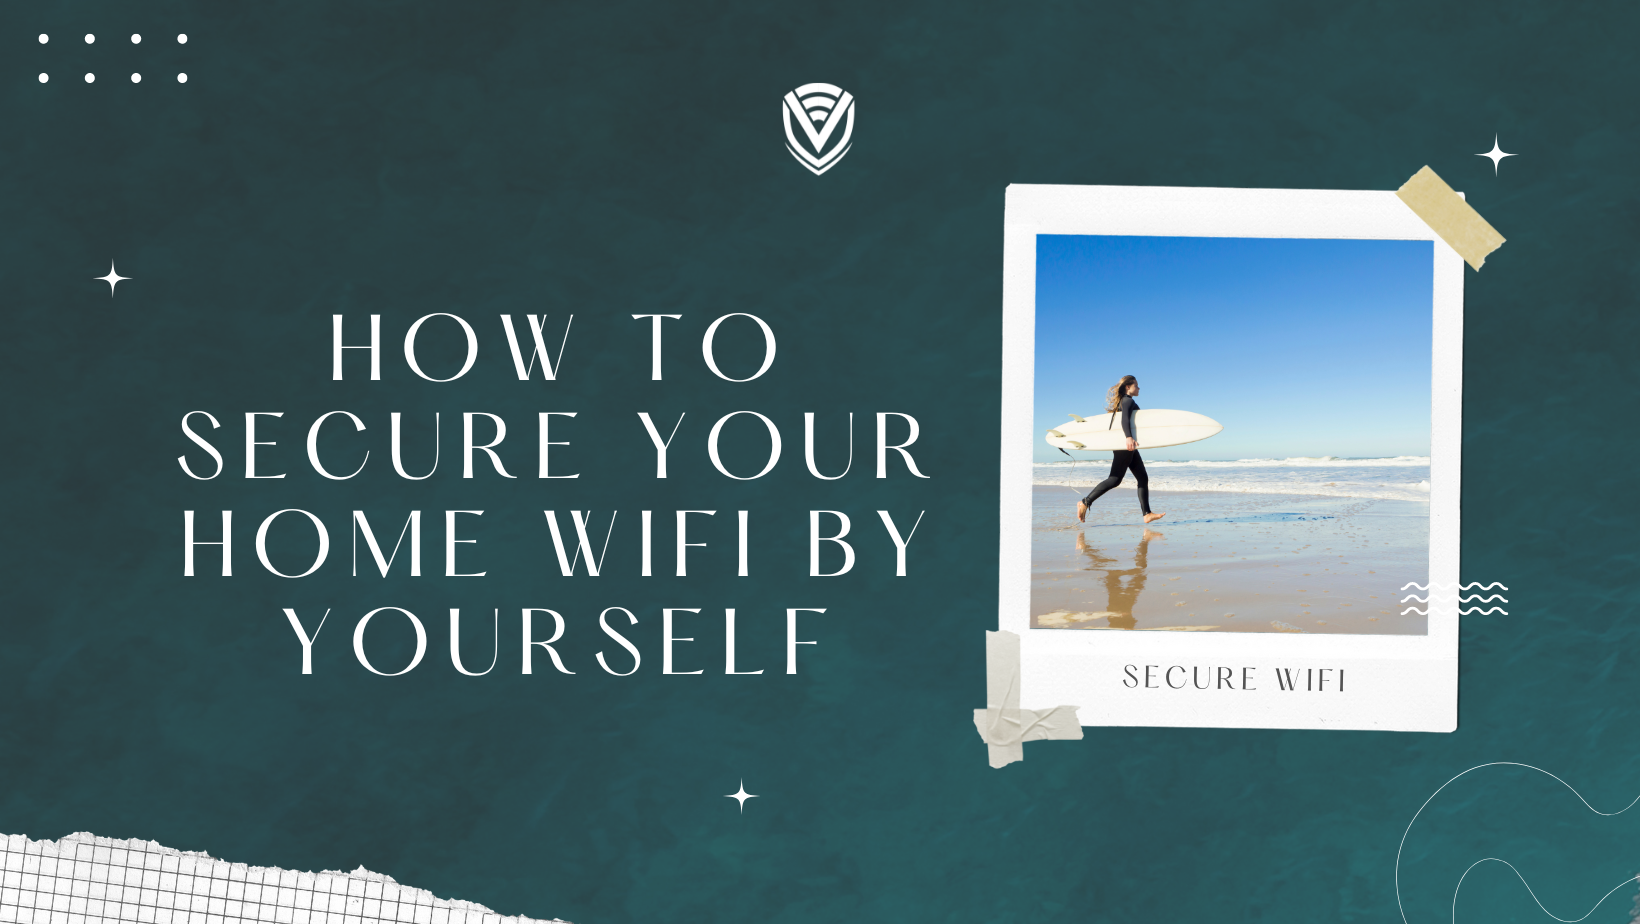 How To Secure Your Home WIFI By Yourself